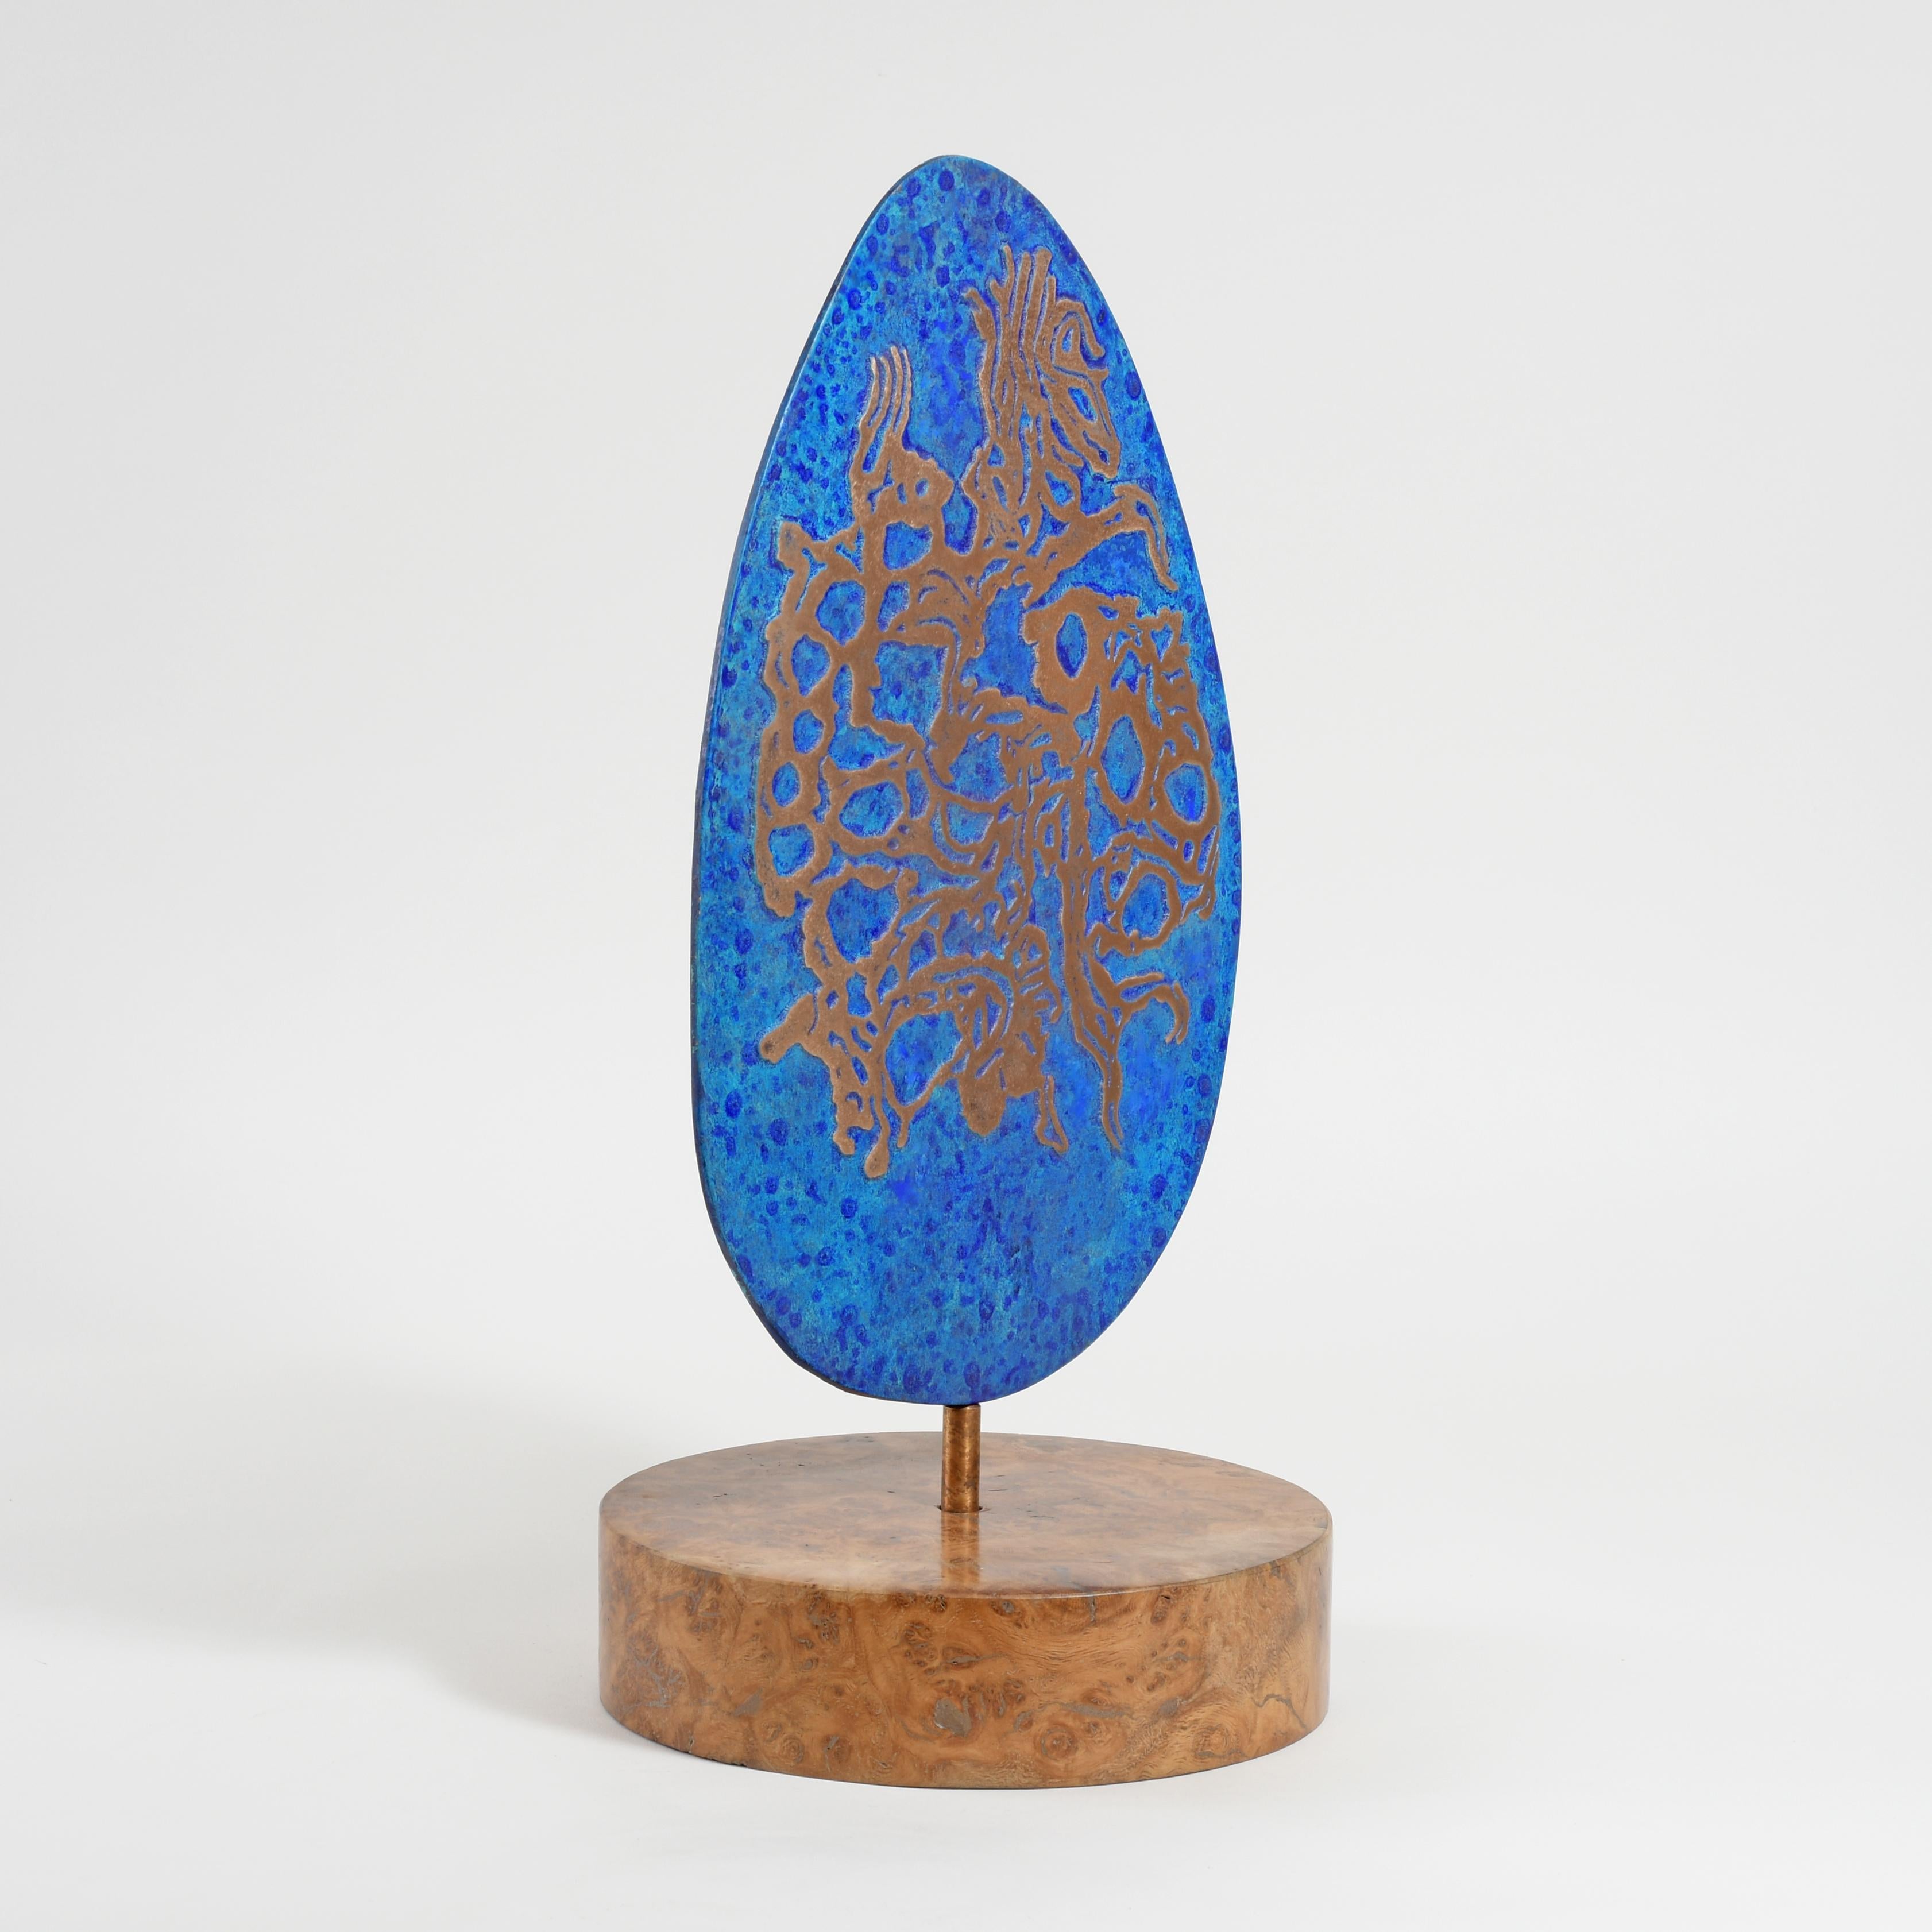 Bronze rotating on a burr oak base
Series of variations.
Stamped with monogram signature and uniquely numbered 734A
On the face the raised pattern in natural bronze is finely rubbed and lacquered and is surrounded by a blue patination and colourwash